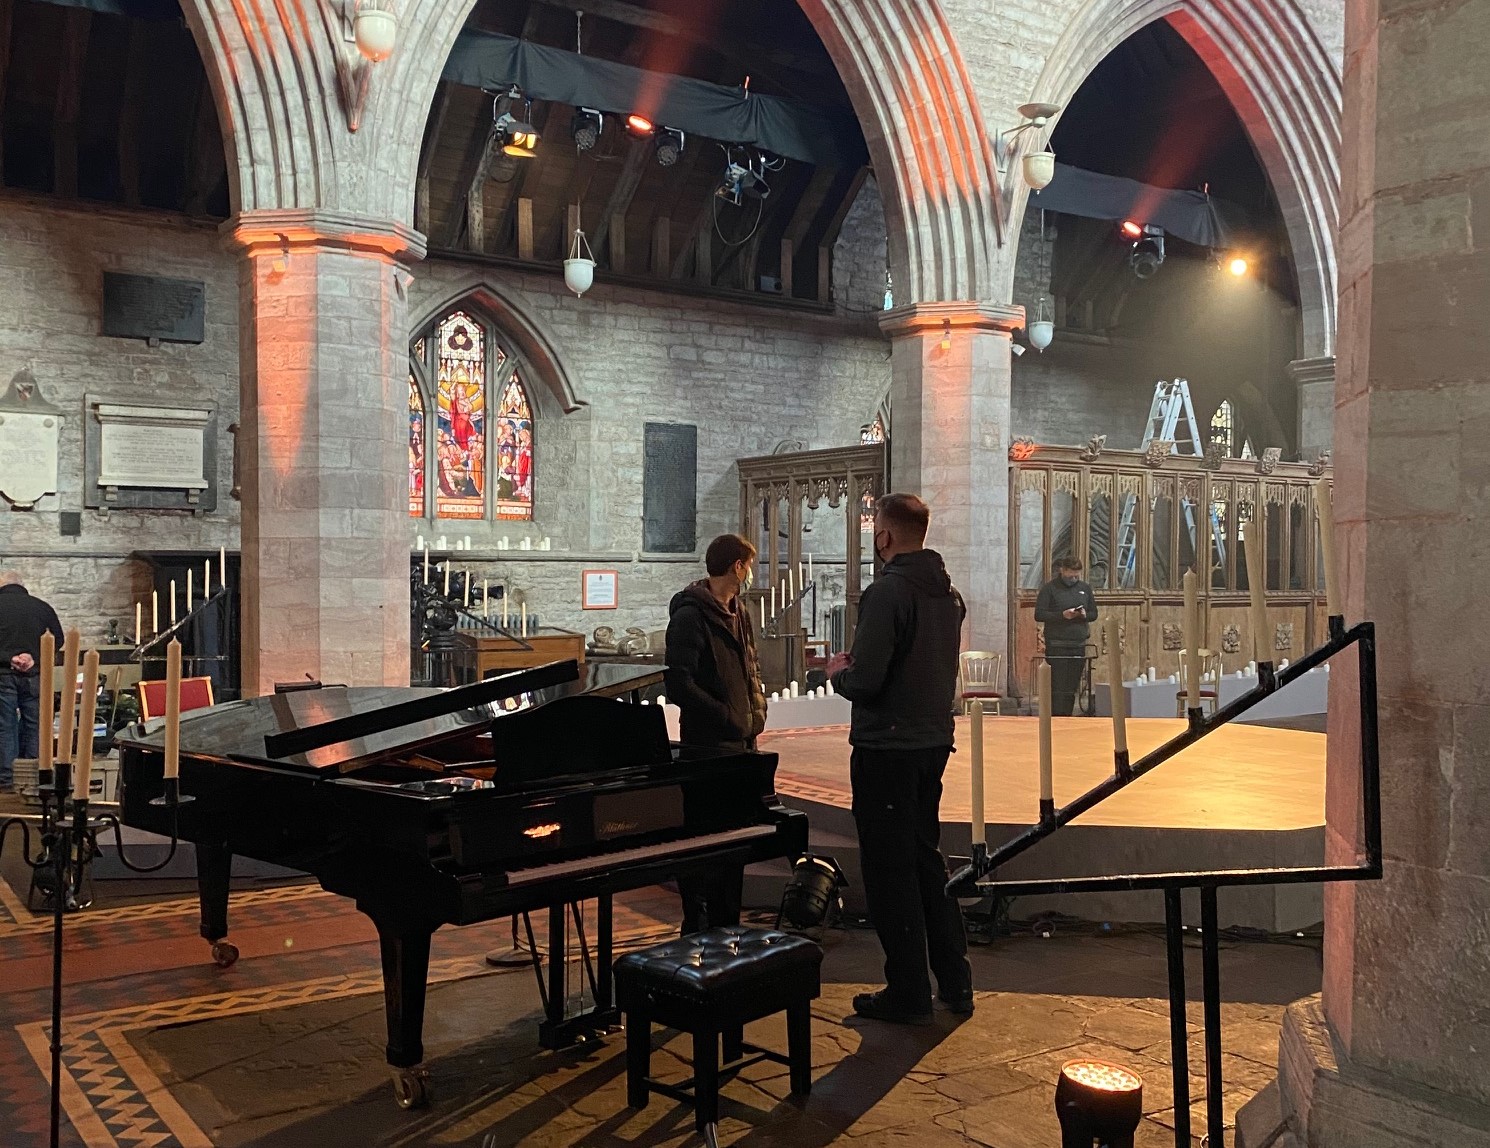 Setting up the cathedral for filming